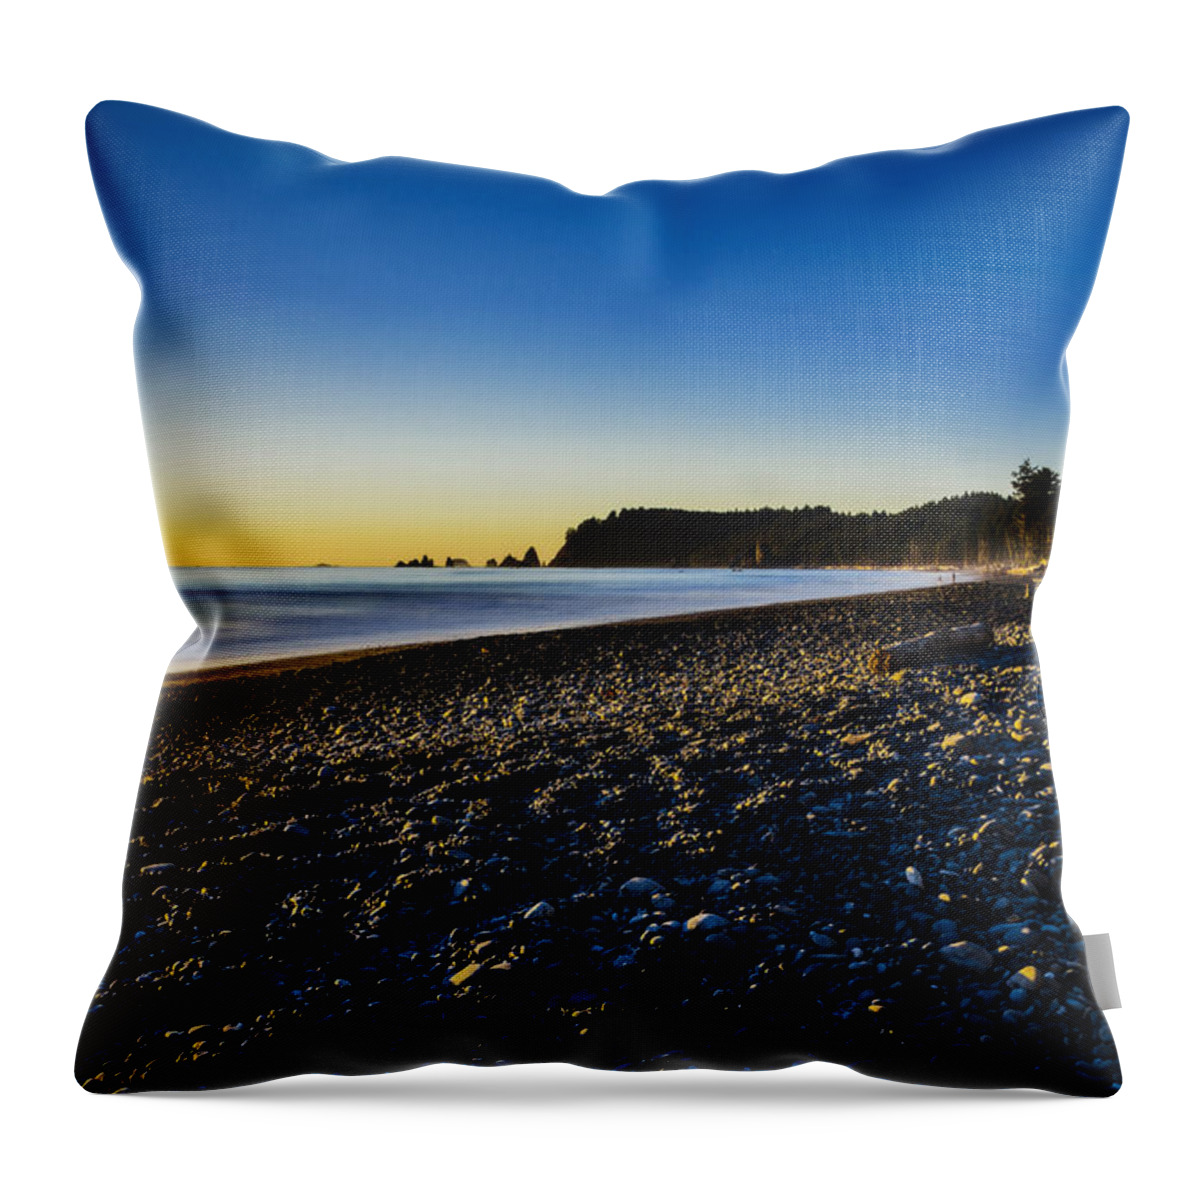 Scenery Throw Pillow featuring the photograph Rialto Beach Sunset by Pelo Blanco Photo